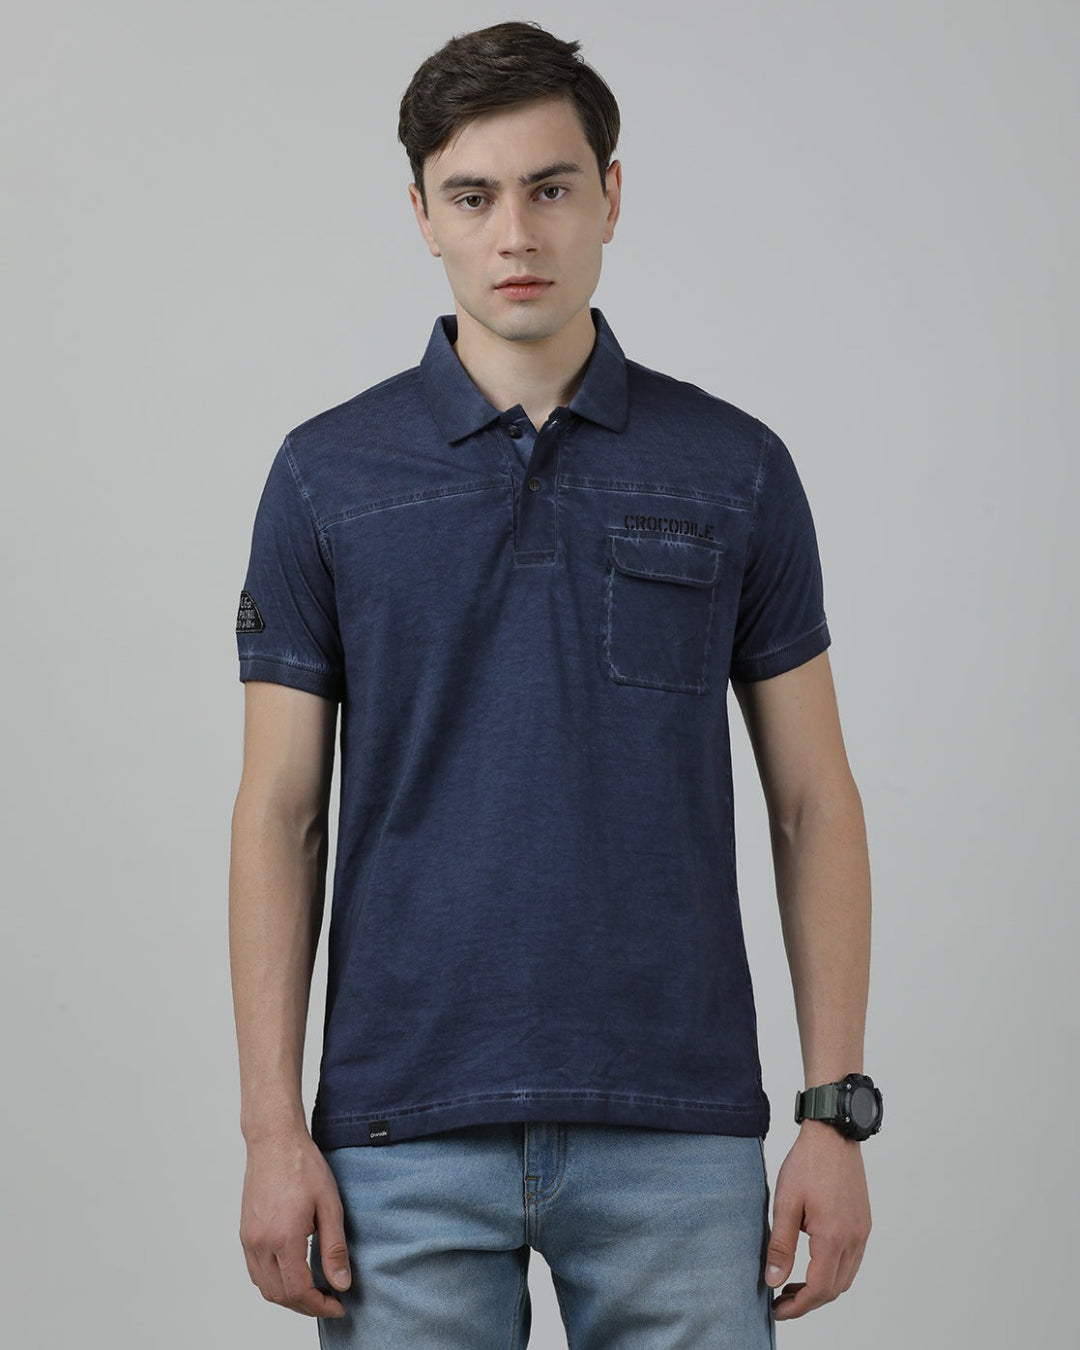 Casual Blue T-Shirt Half Sleeve Slim Fit with Collar for Men